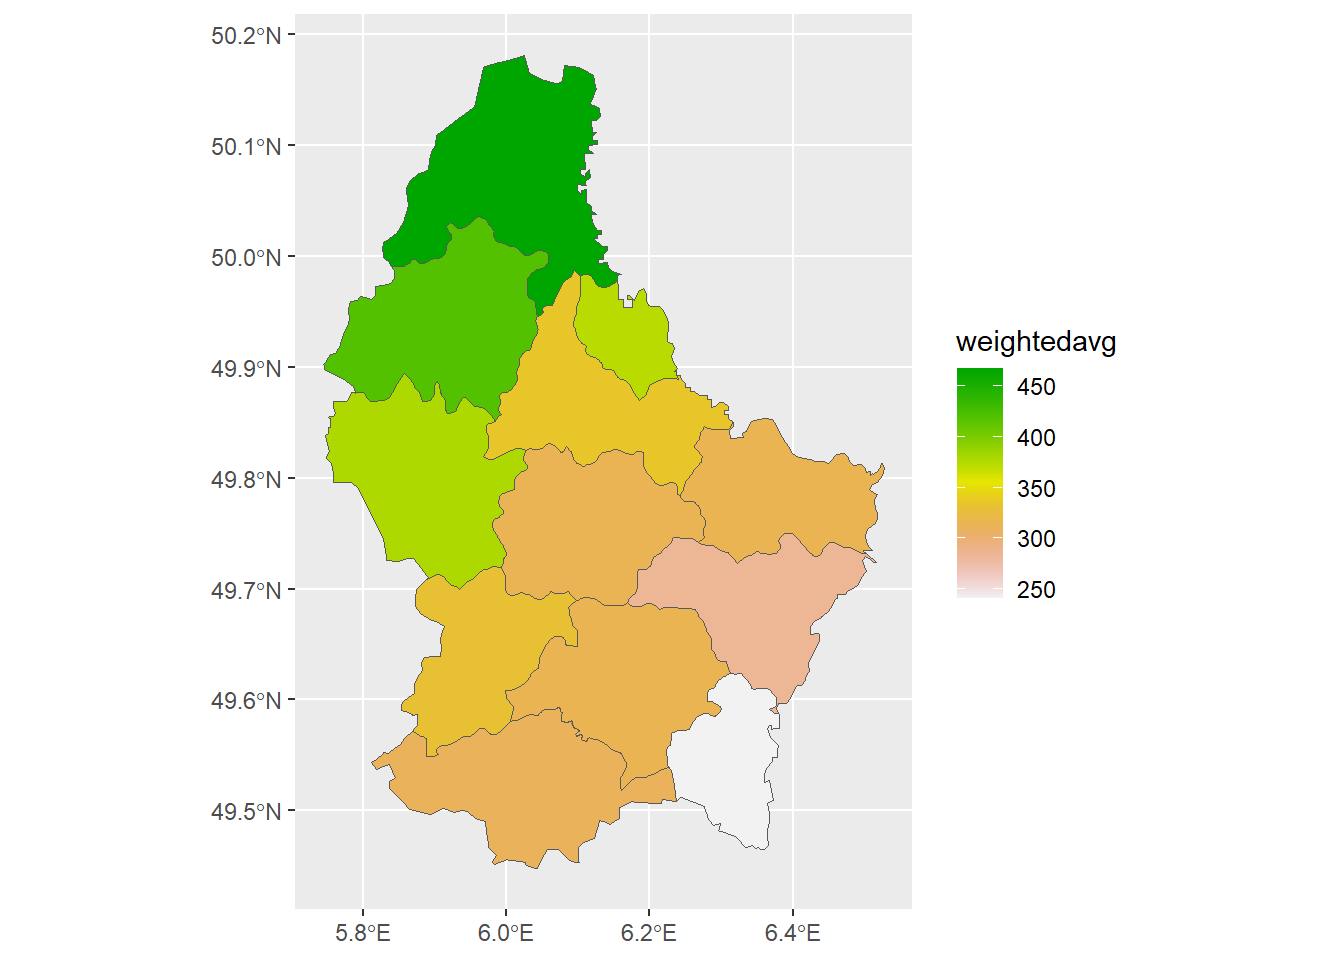 Average and area-weighted average of elevation values in each of the divisions of Luxembourg.